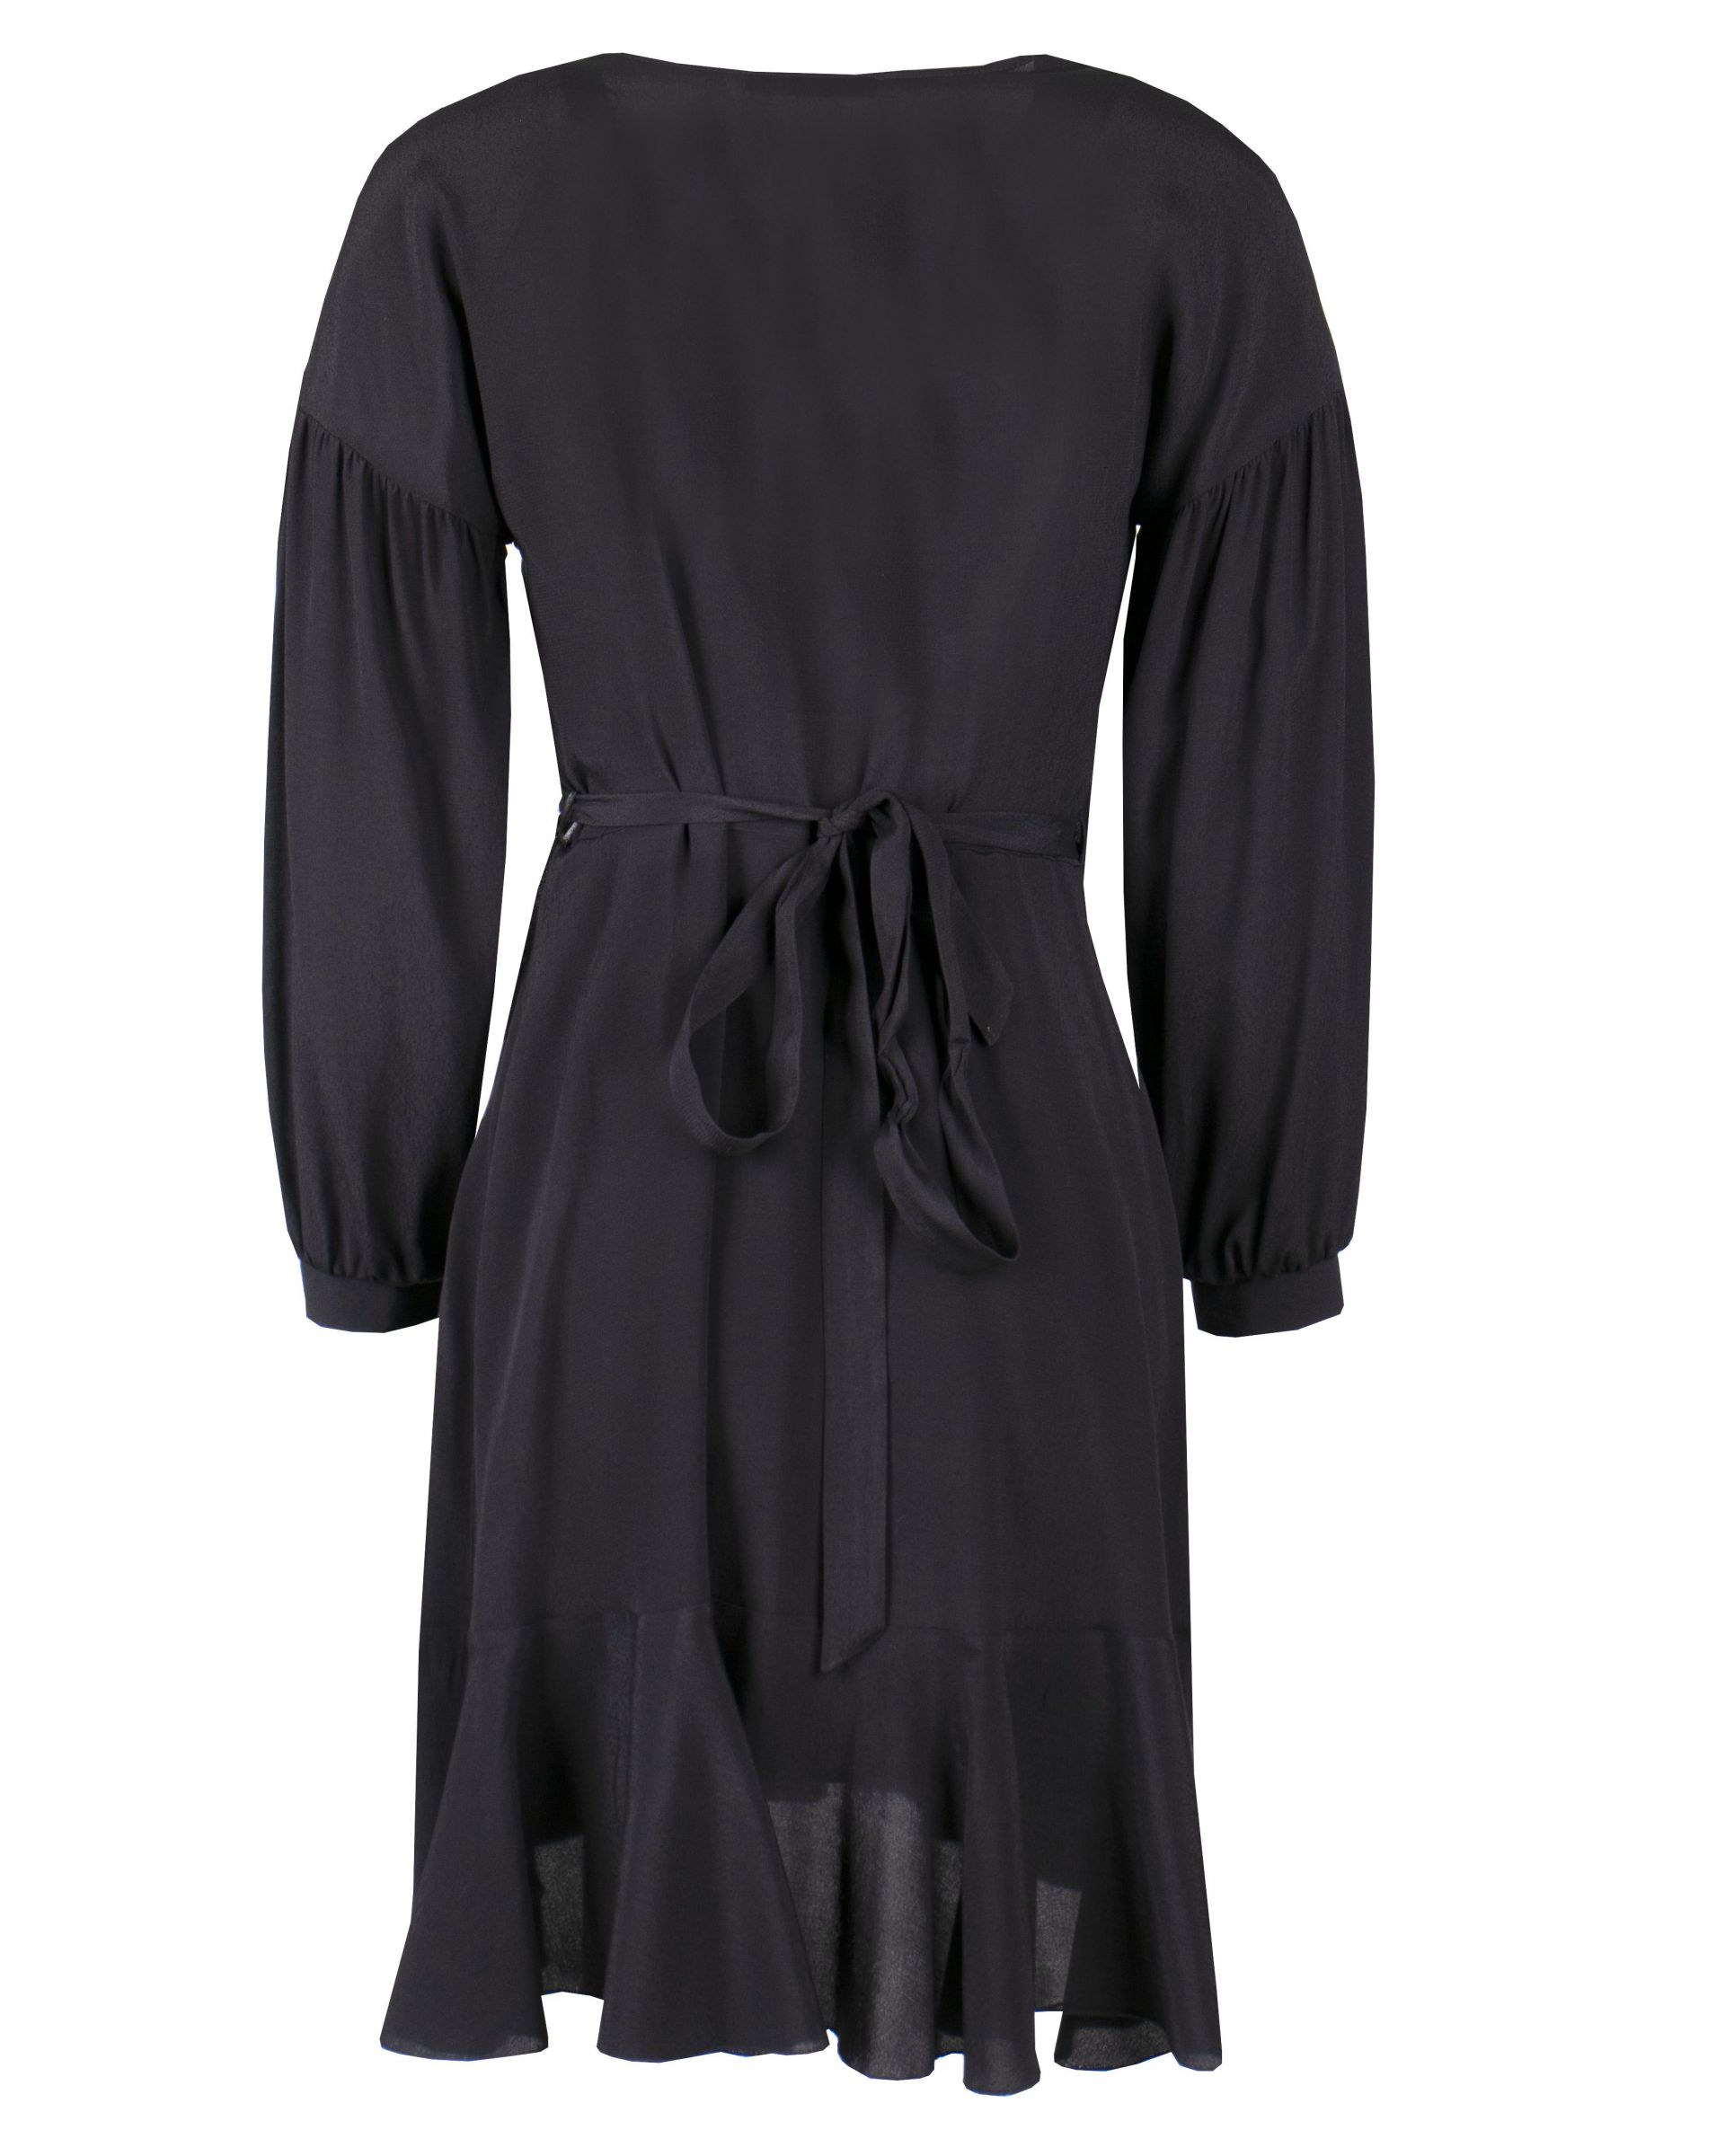 Wrap dress with long sleeves, with viscose and rayon 1